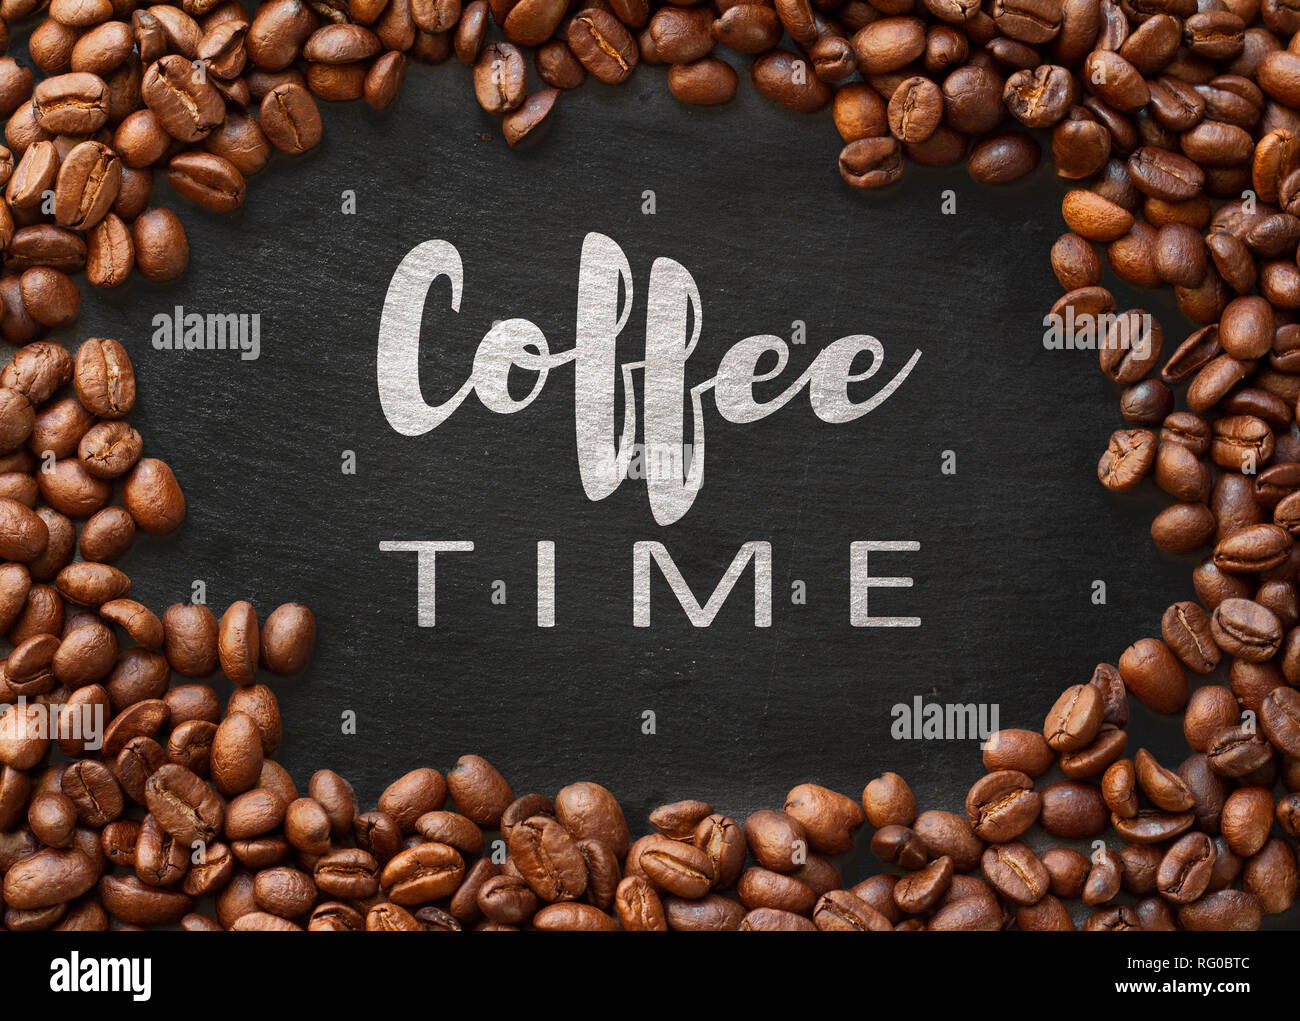 coffee time concept. retro text written inside roasted coffee beans frame. Stock Photo